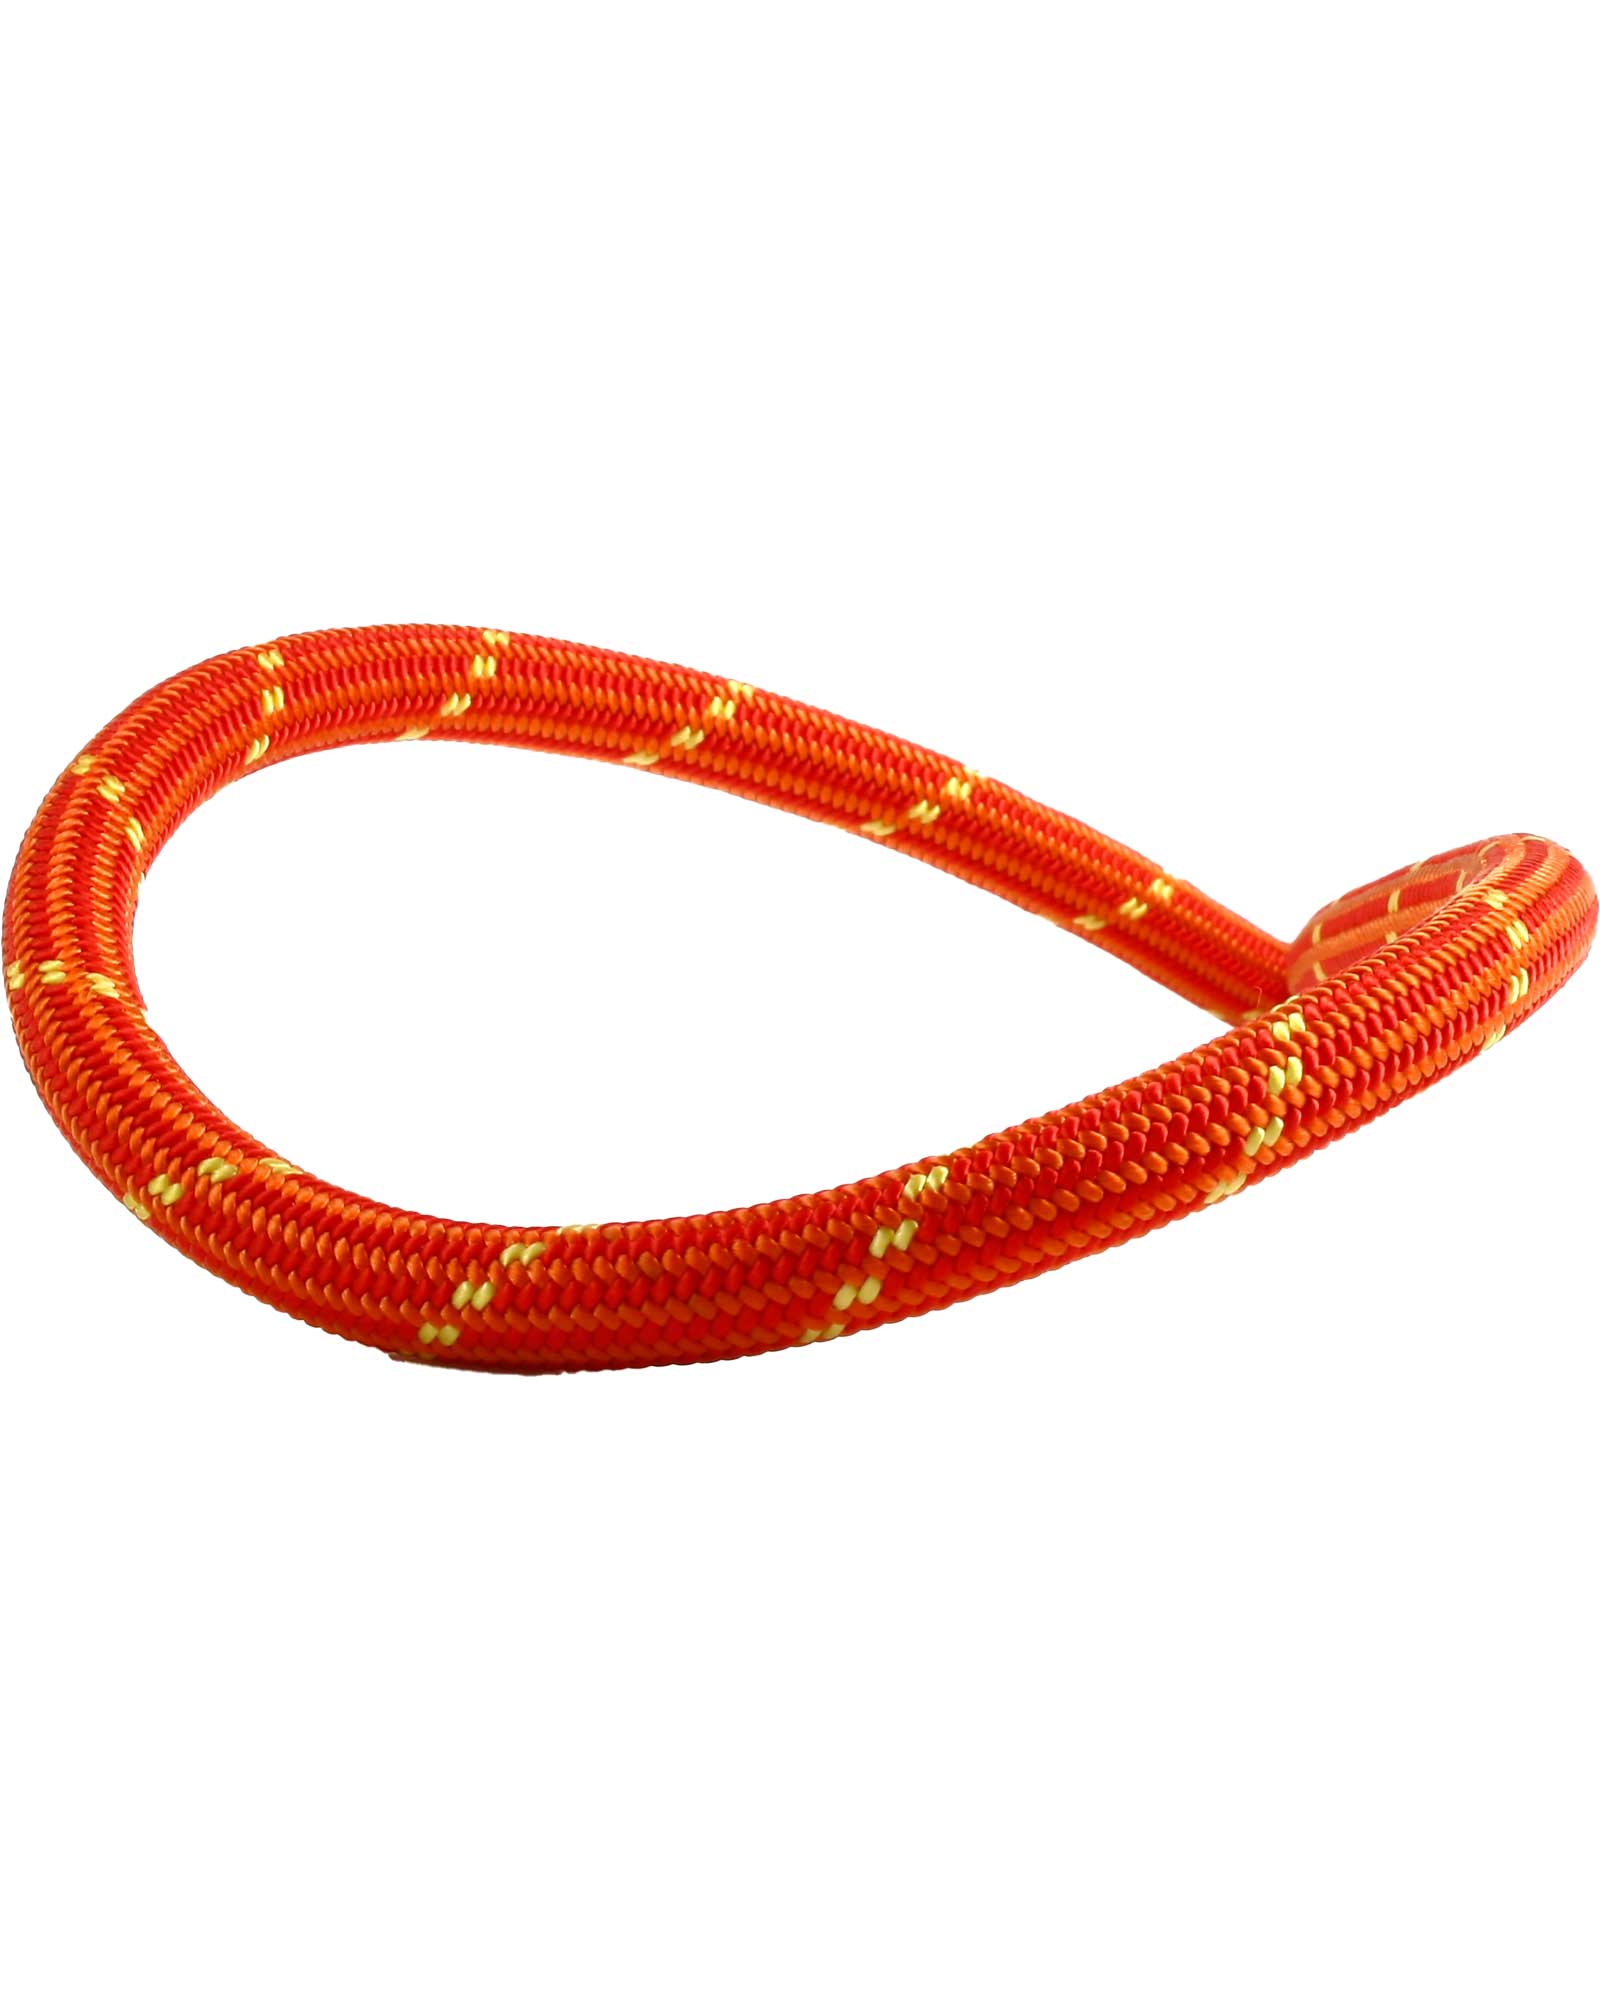 Edelweiss Energy 9.5mm X 60m Rope